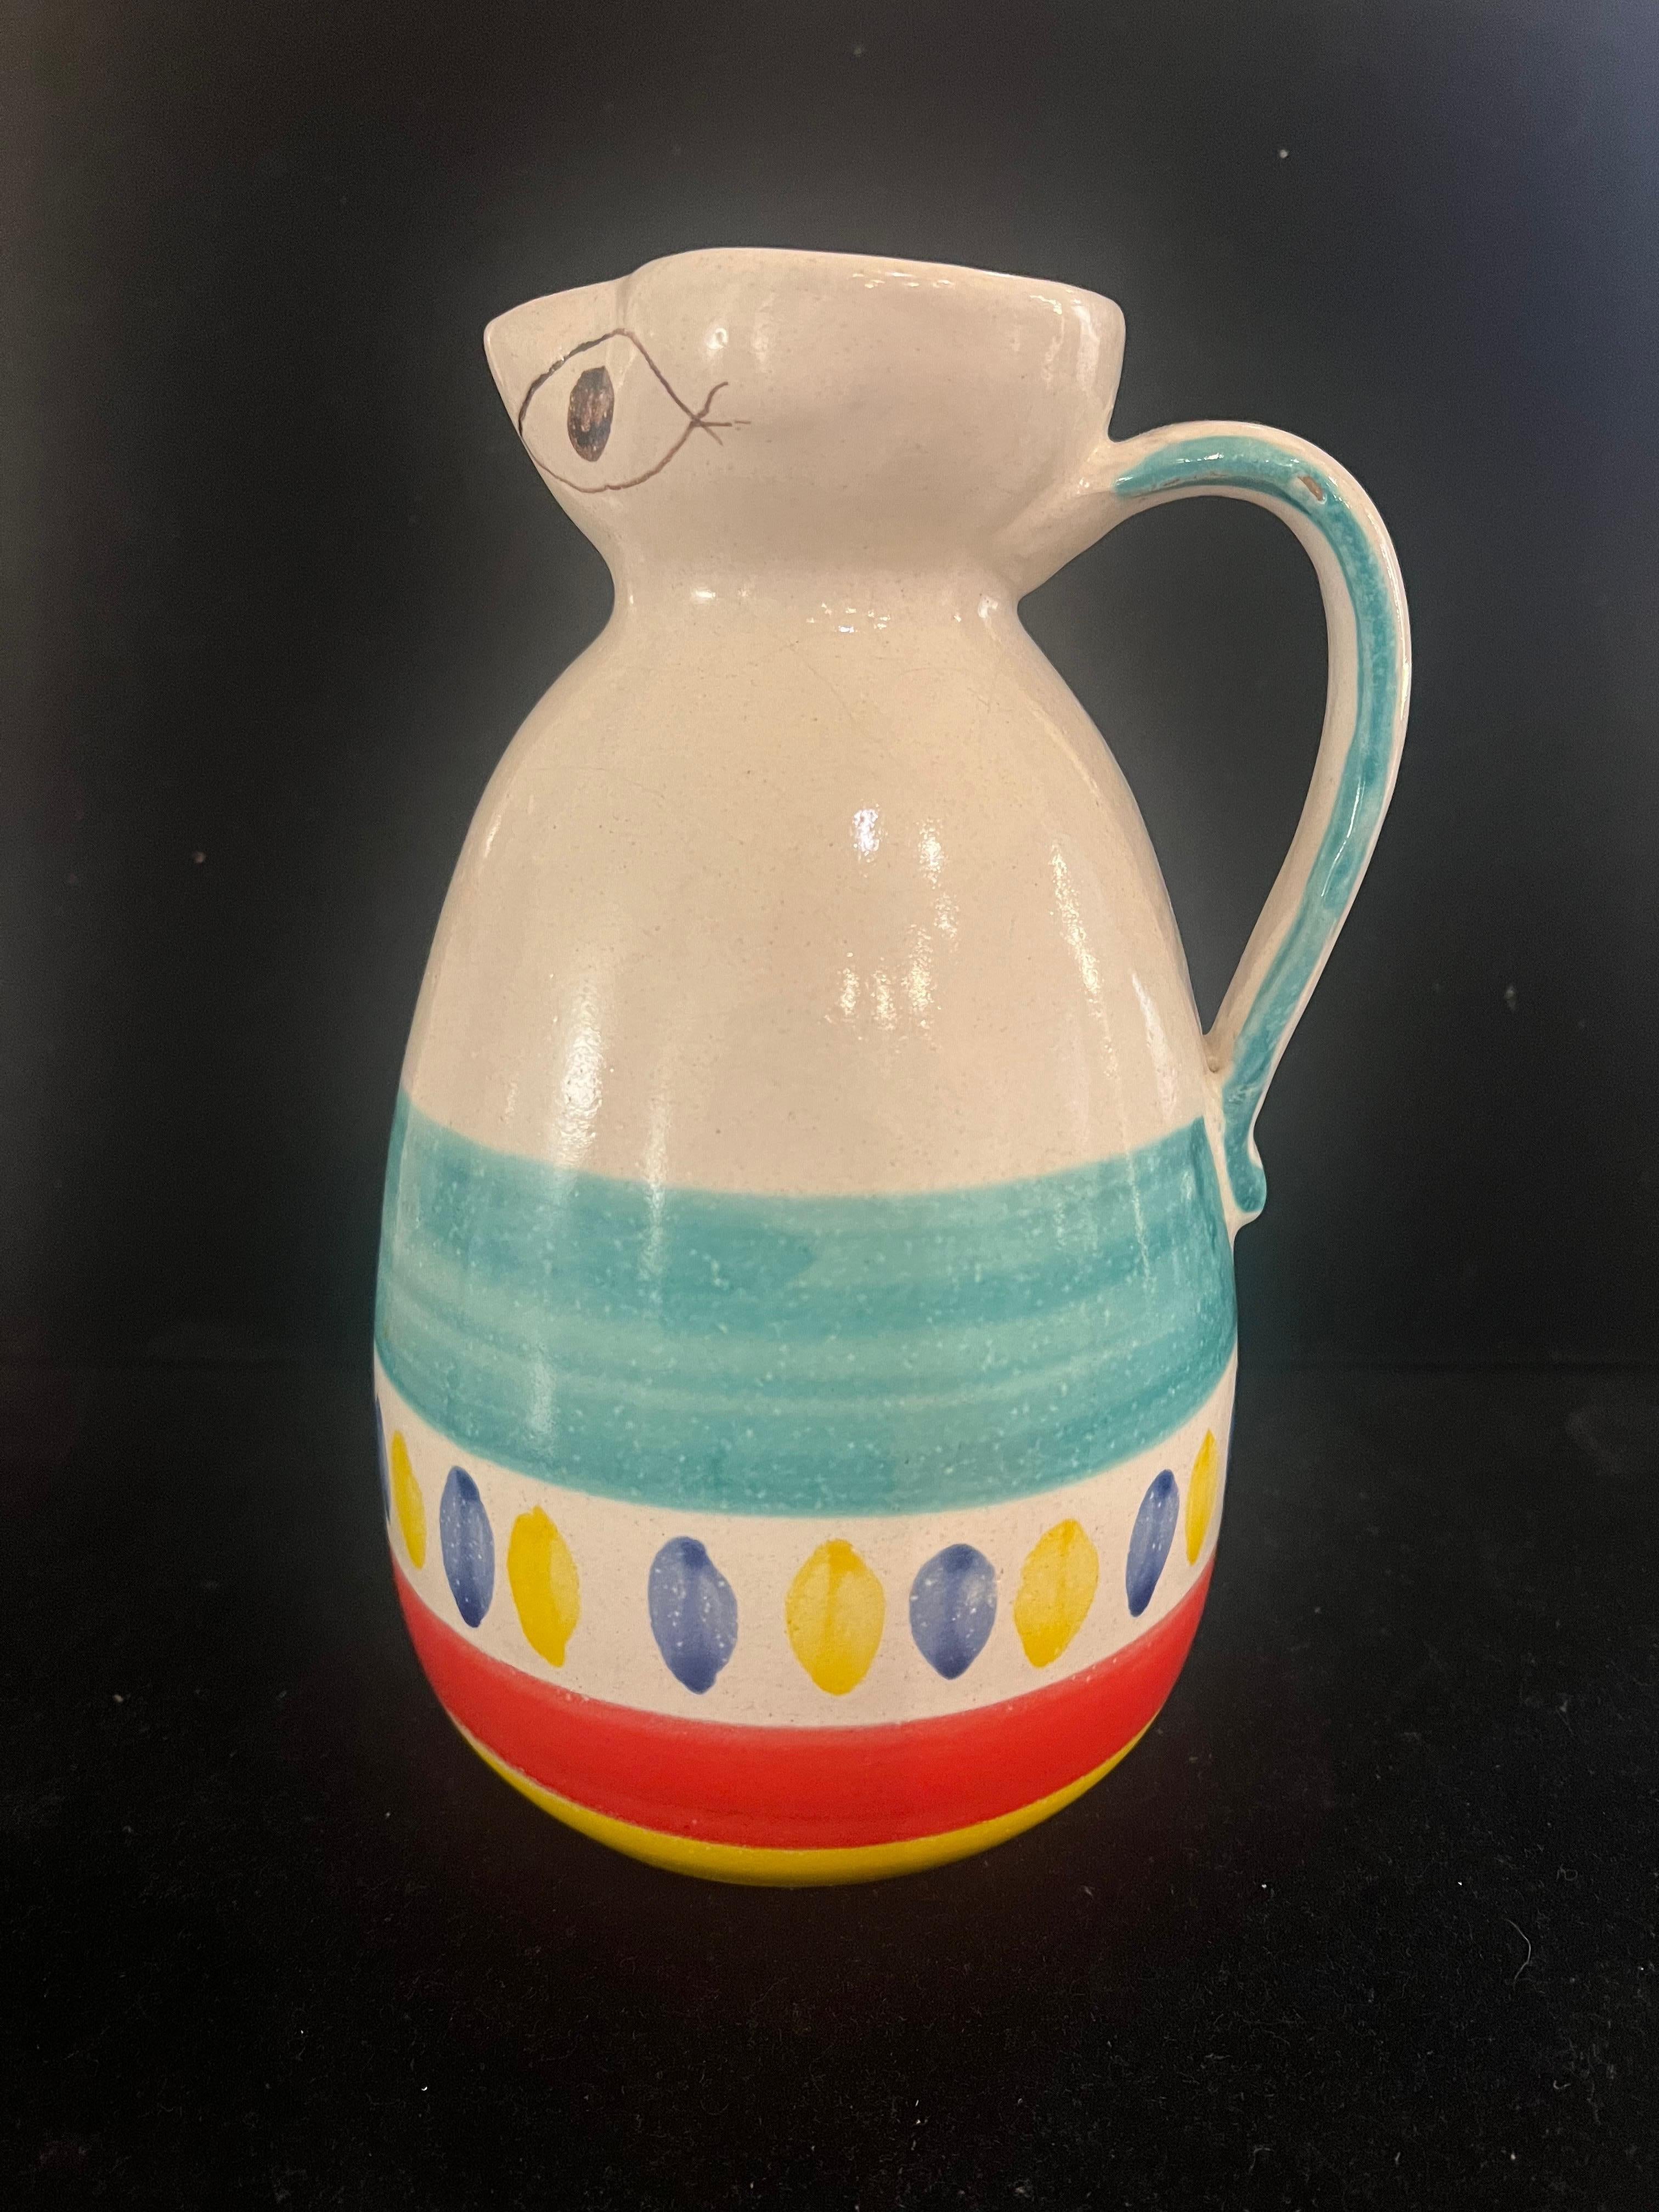 Hand-Painted Ceramic Water RareJug by Giovanni Desimone With Sangria Recipe In Excellent Condition For Sale In San Diego, CA